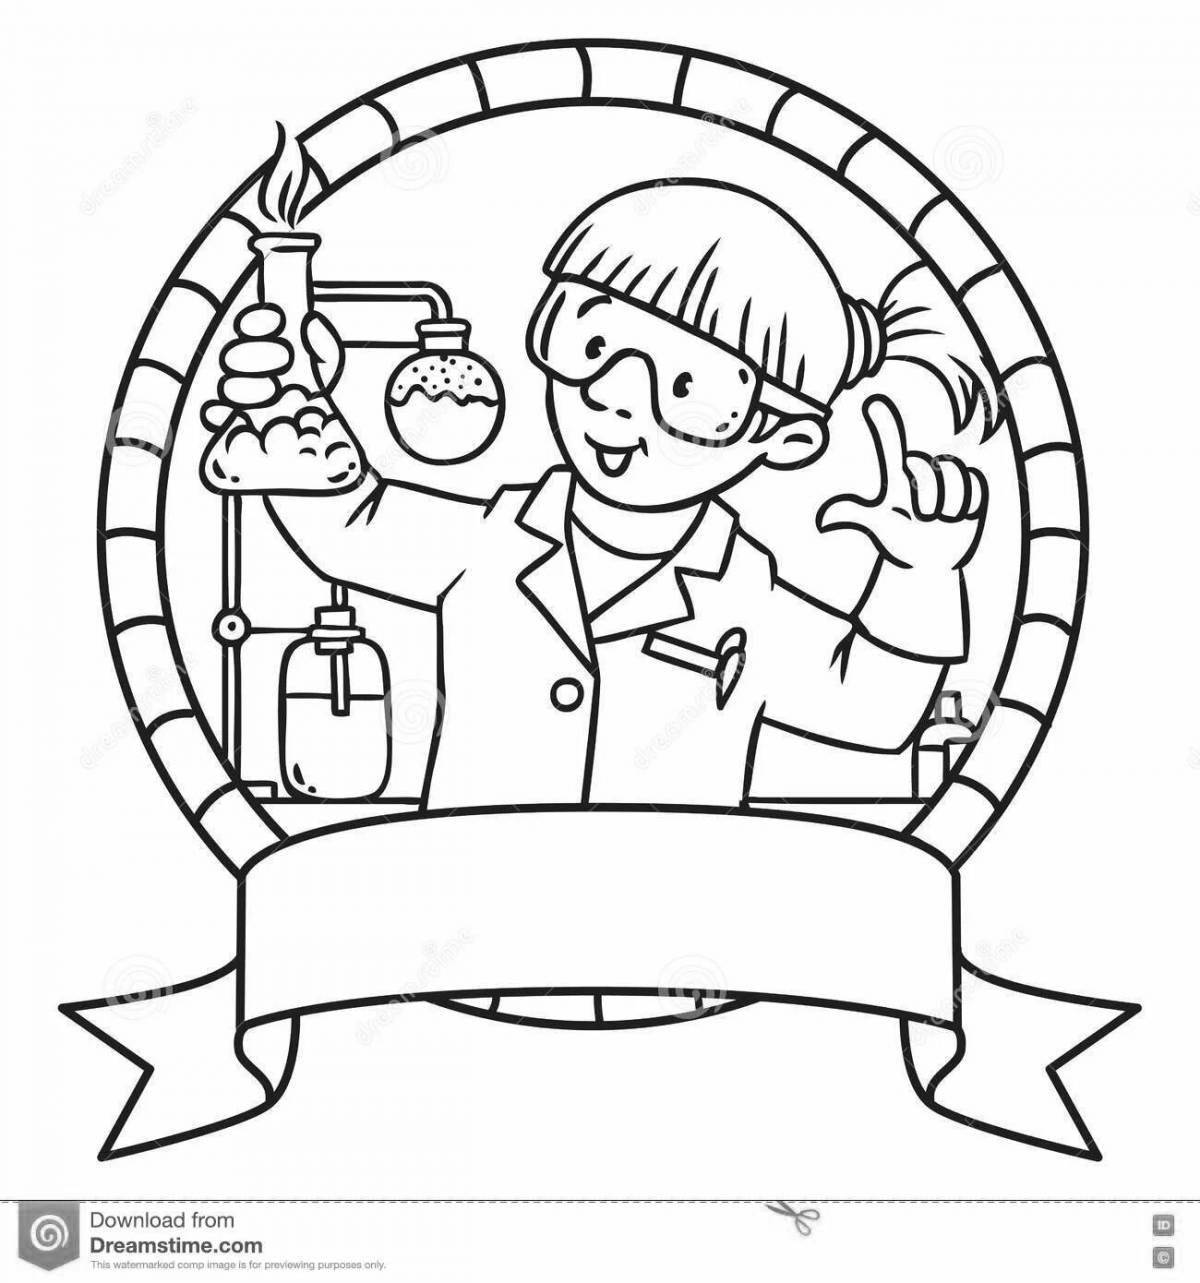 Radiant coloring page of the world of science